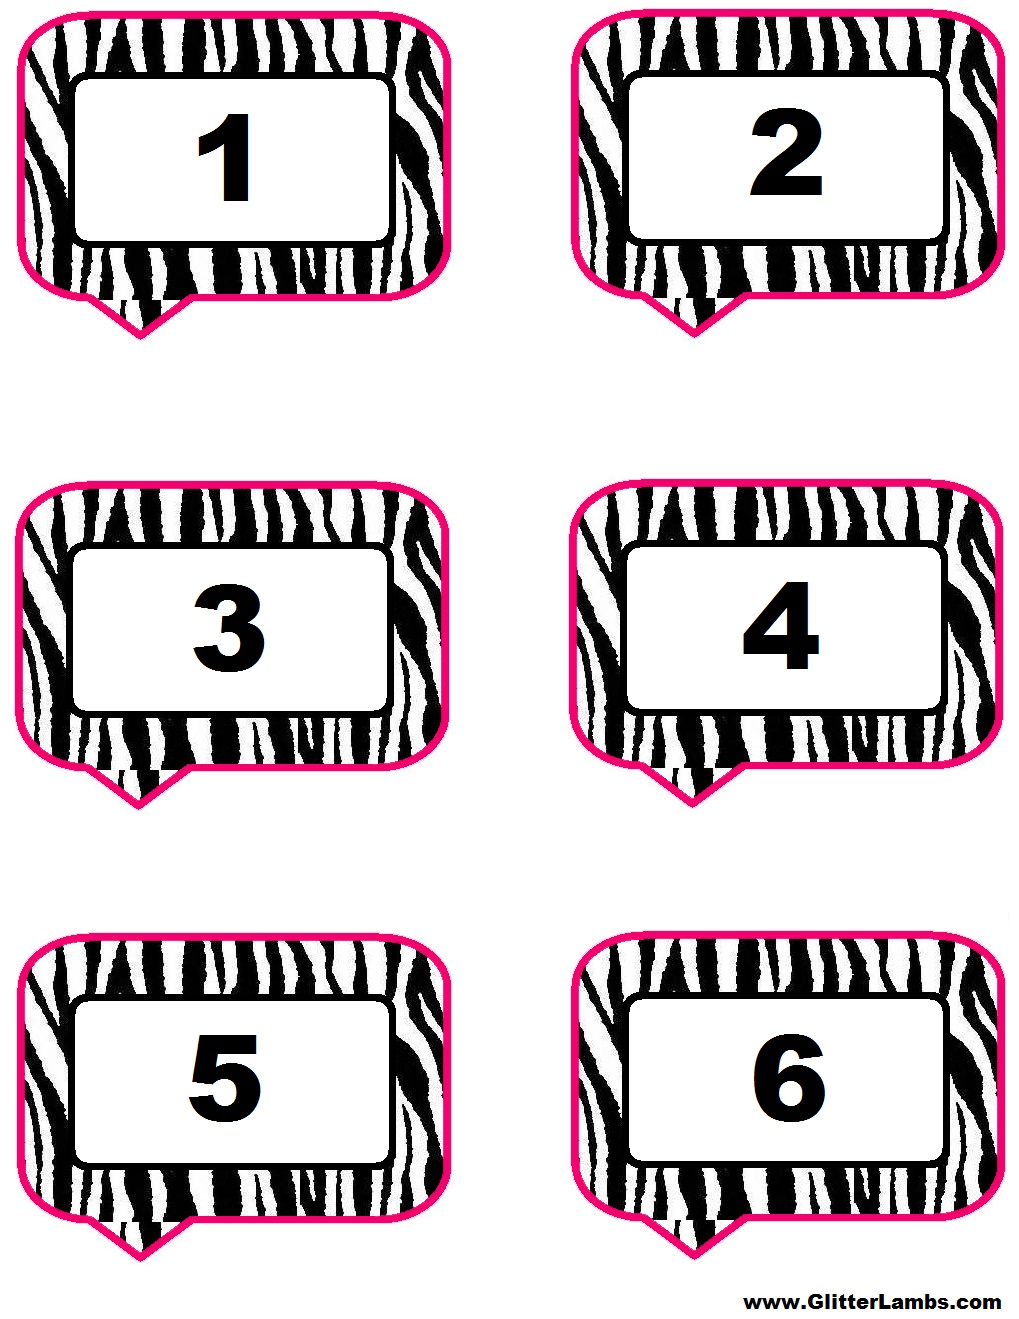 glitter-lambs-pink-zebra-food-label-cards-and-free-printable-cupcake